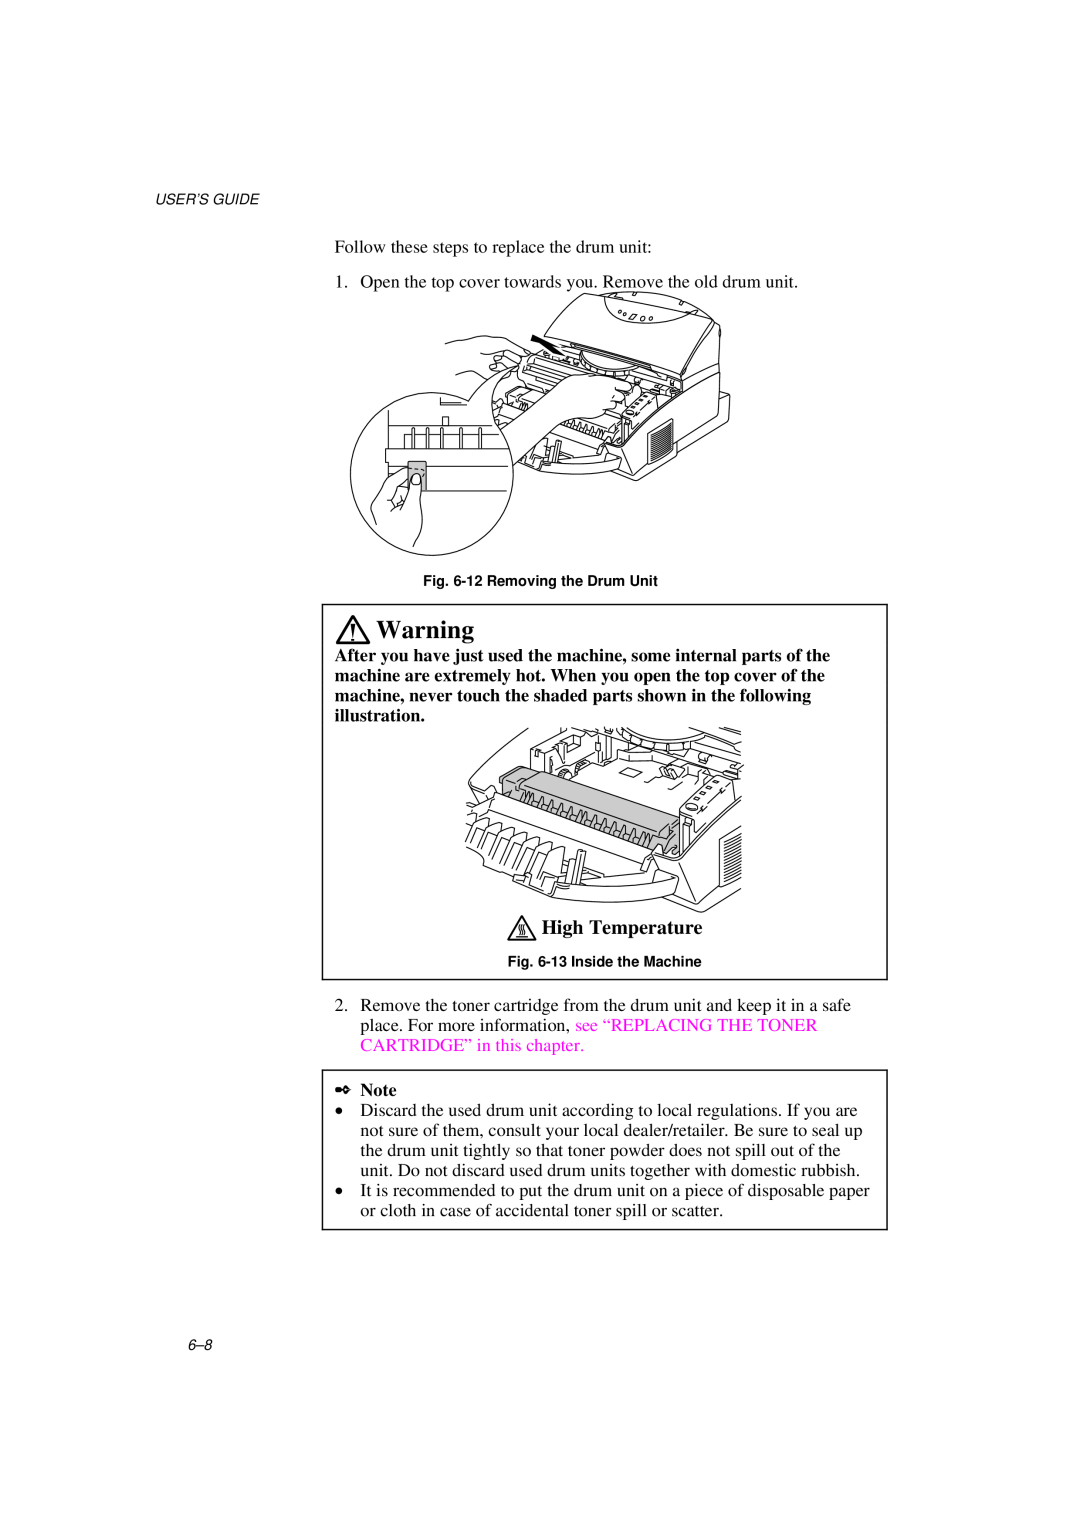 Brother MFC/HL-P2000 manual High Temperature, Follow these steps to replace the drum unit 